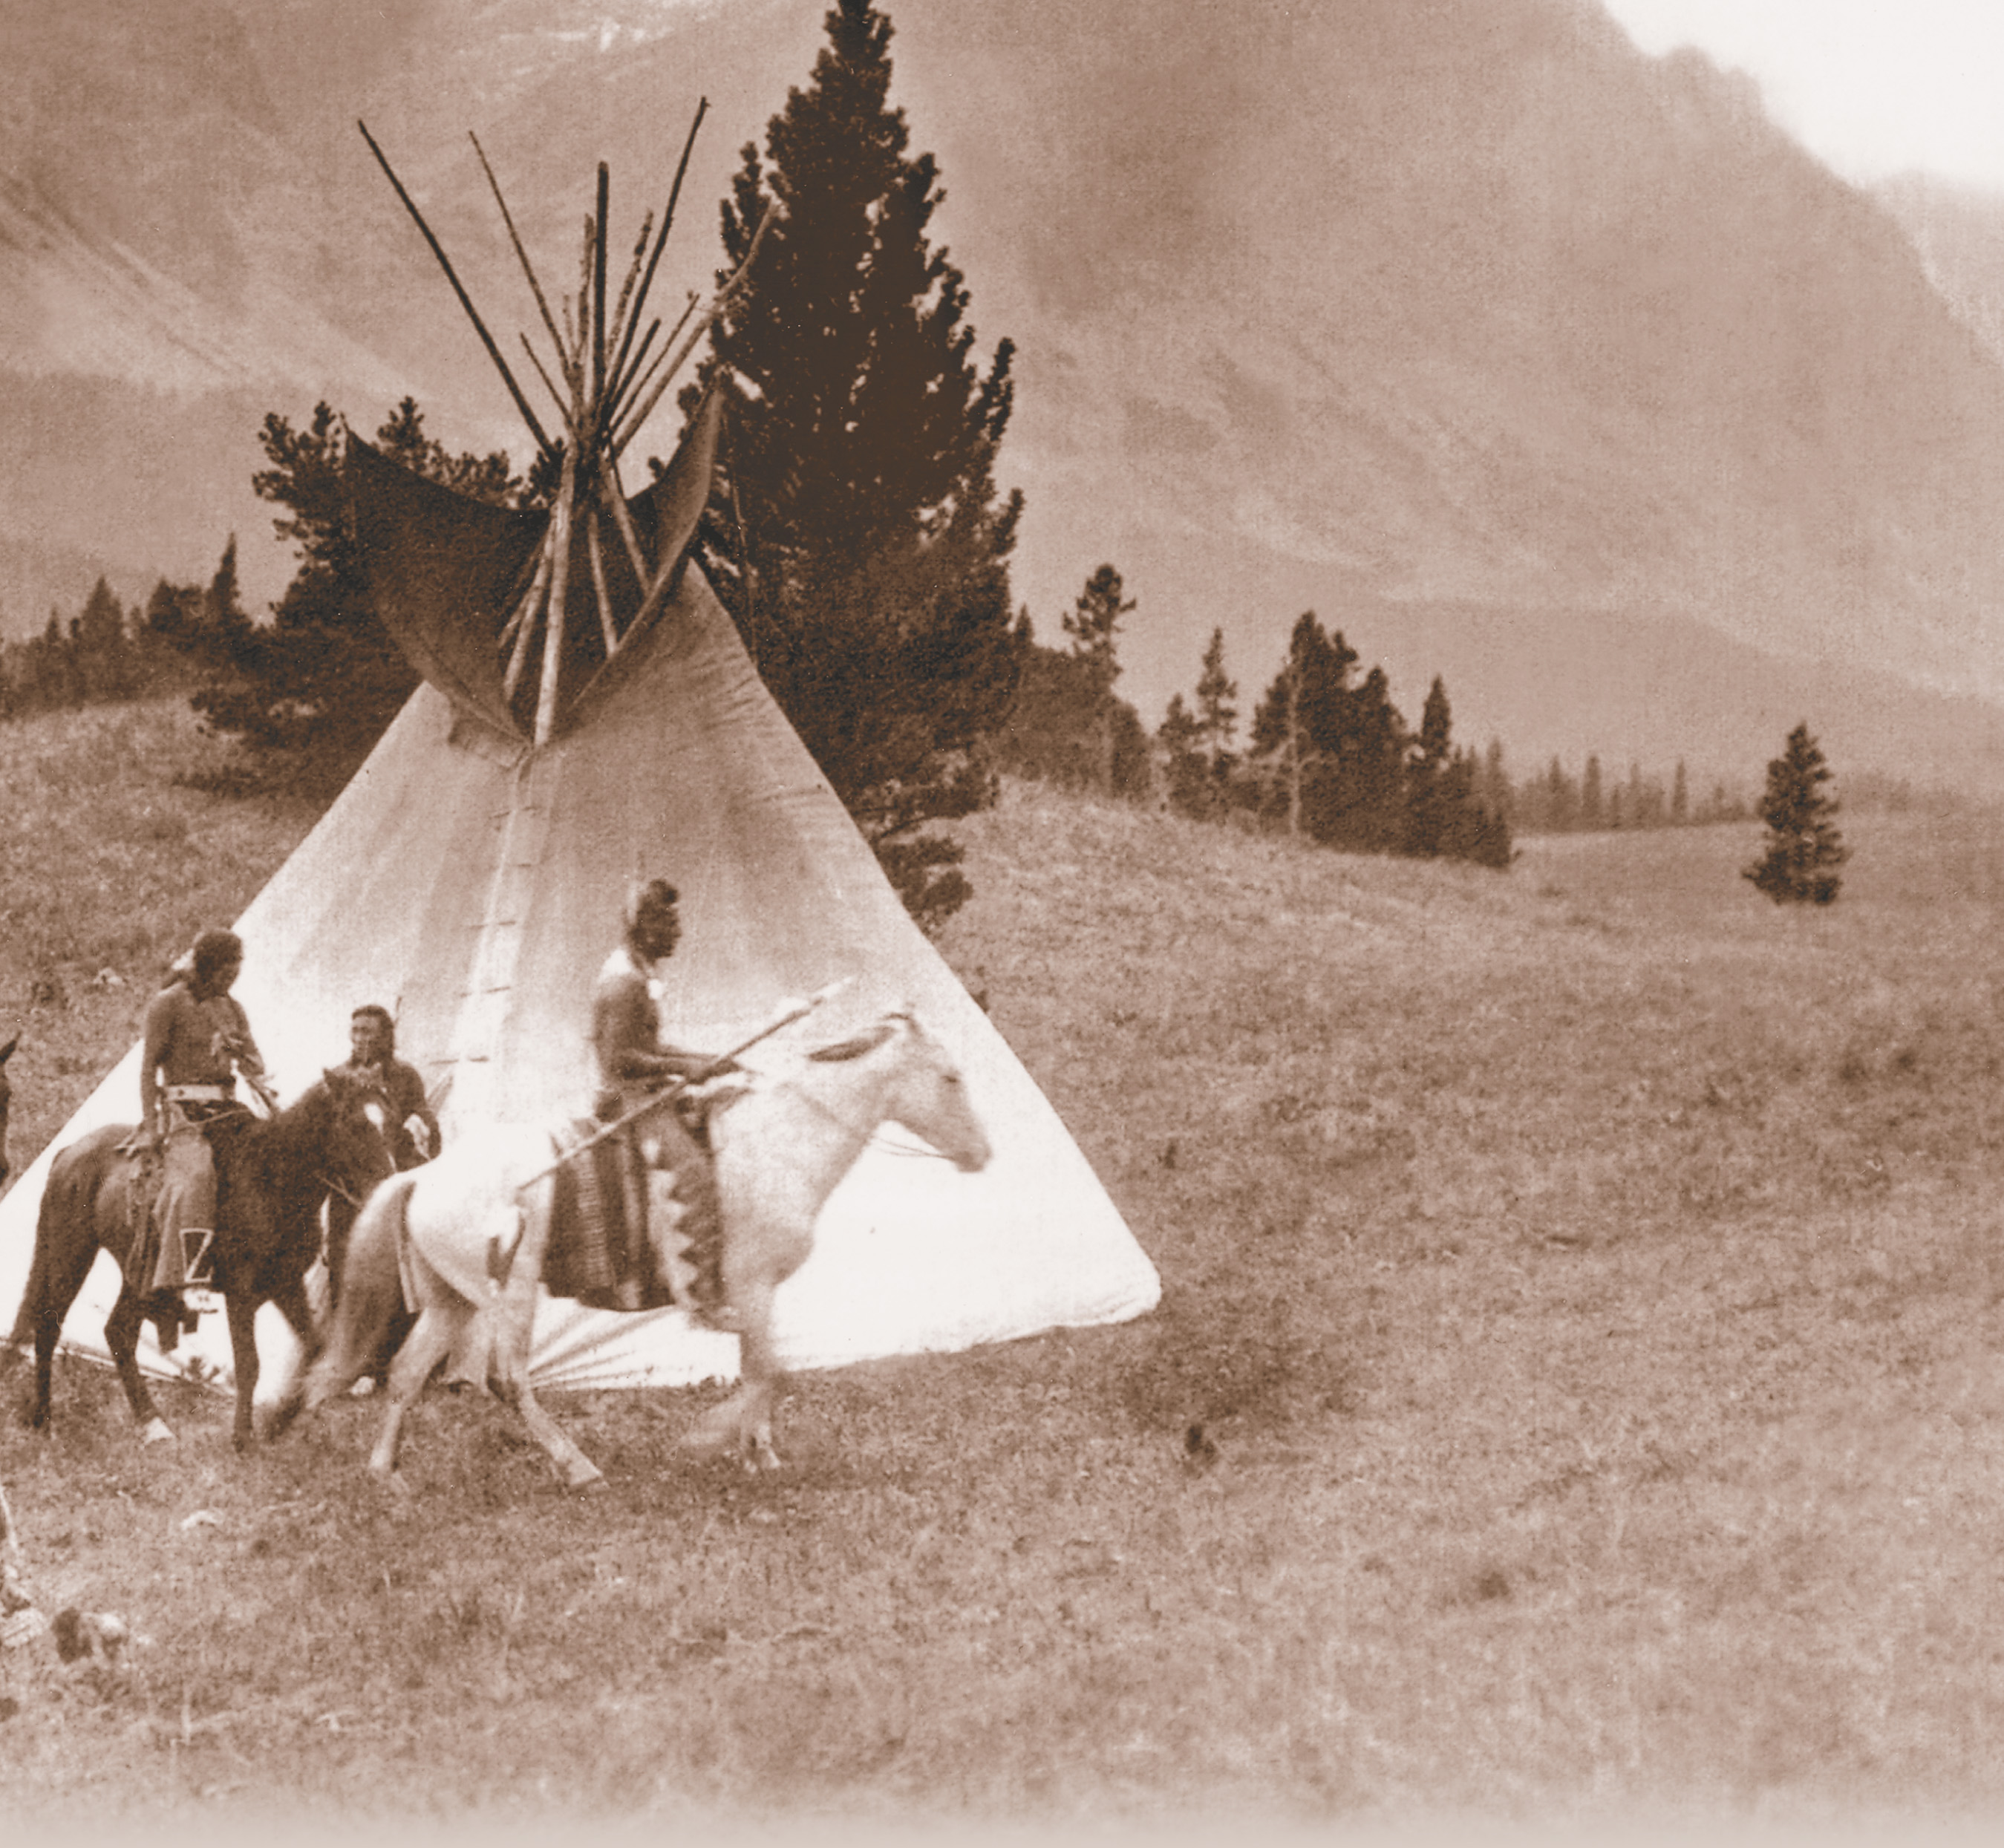 A photo shows members of a Native American tribe. Men ride horses, while women and children gather near a tepee. A title: Changes on the Western Frontier.